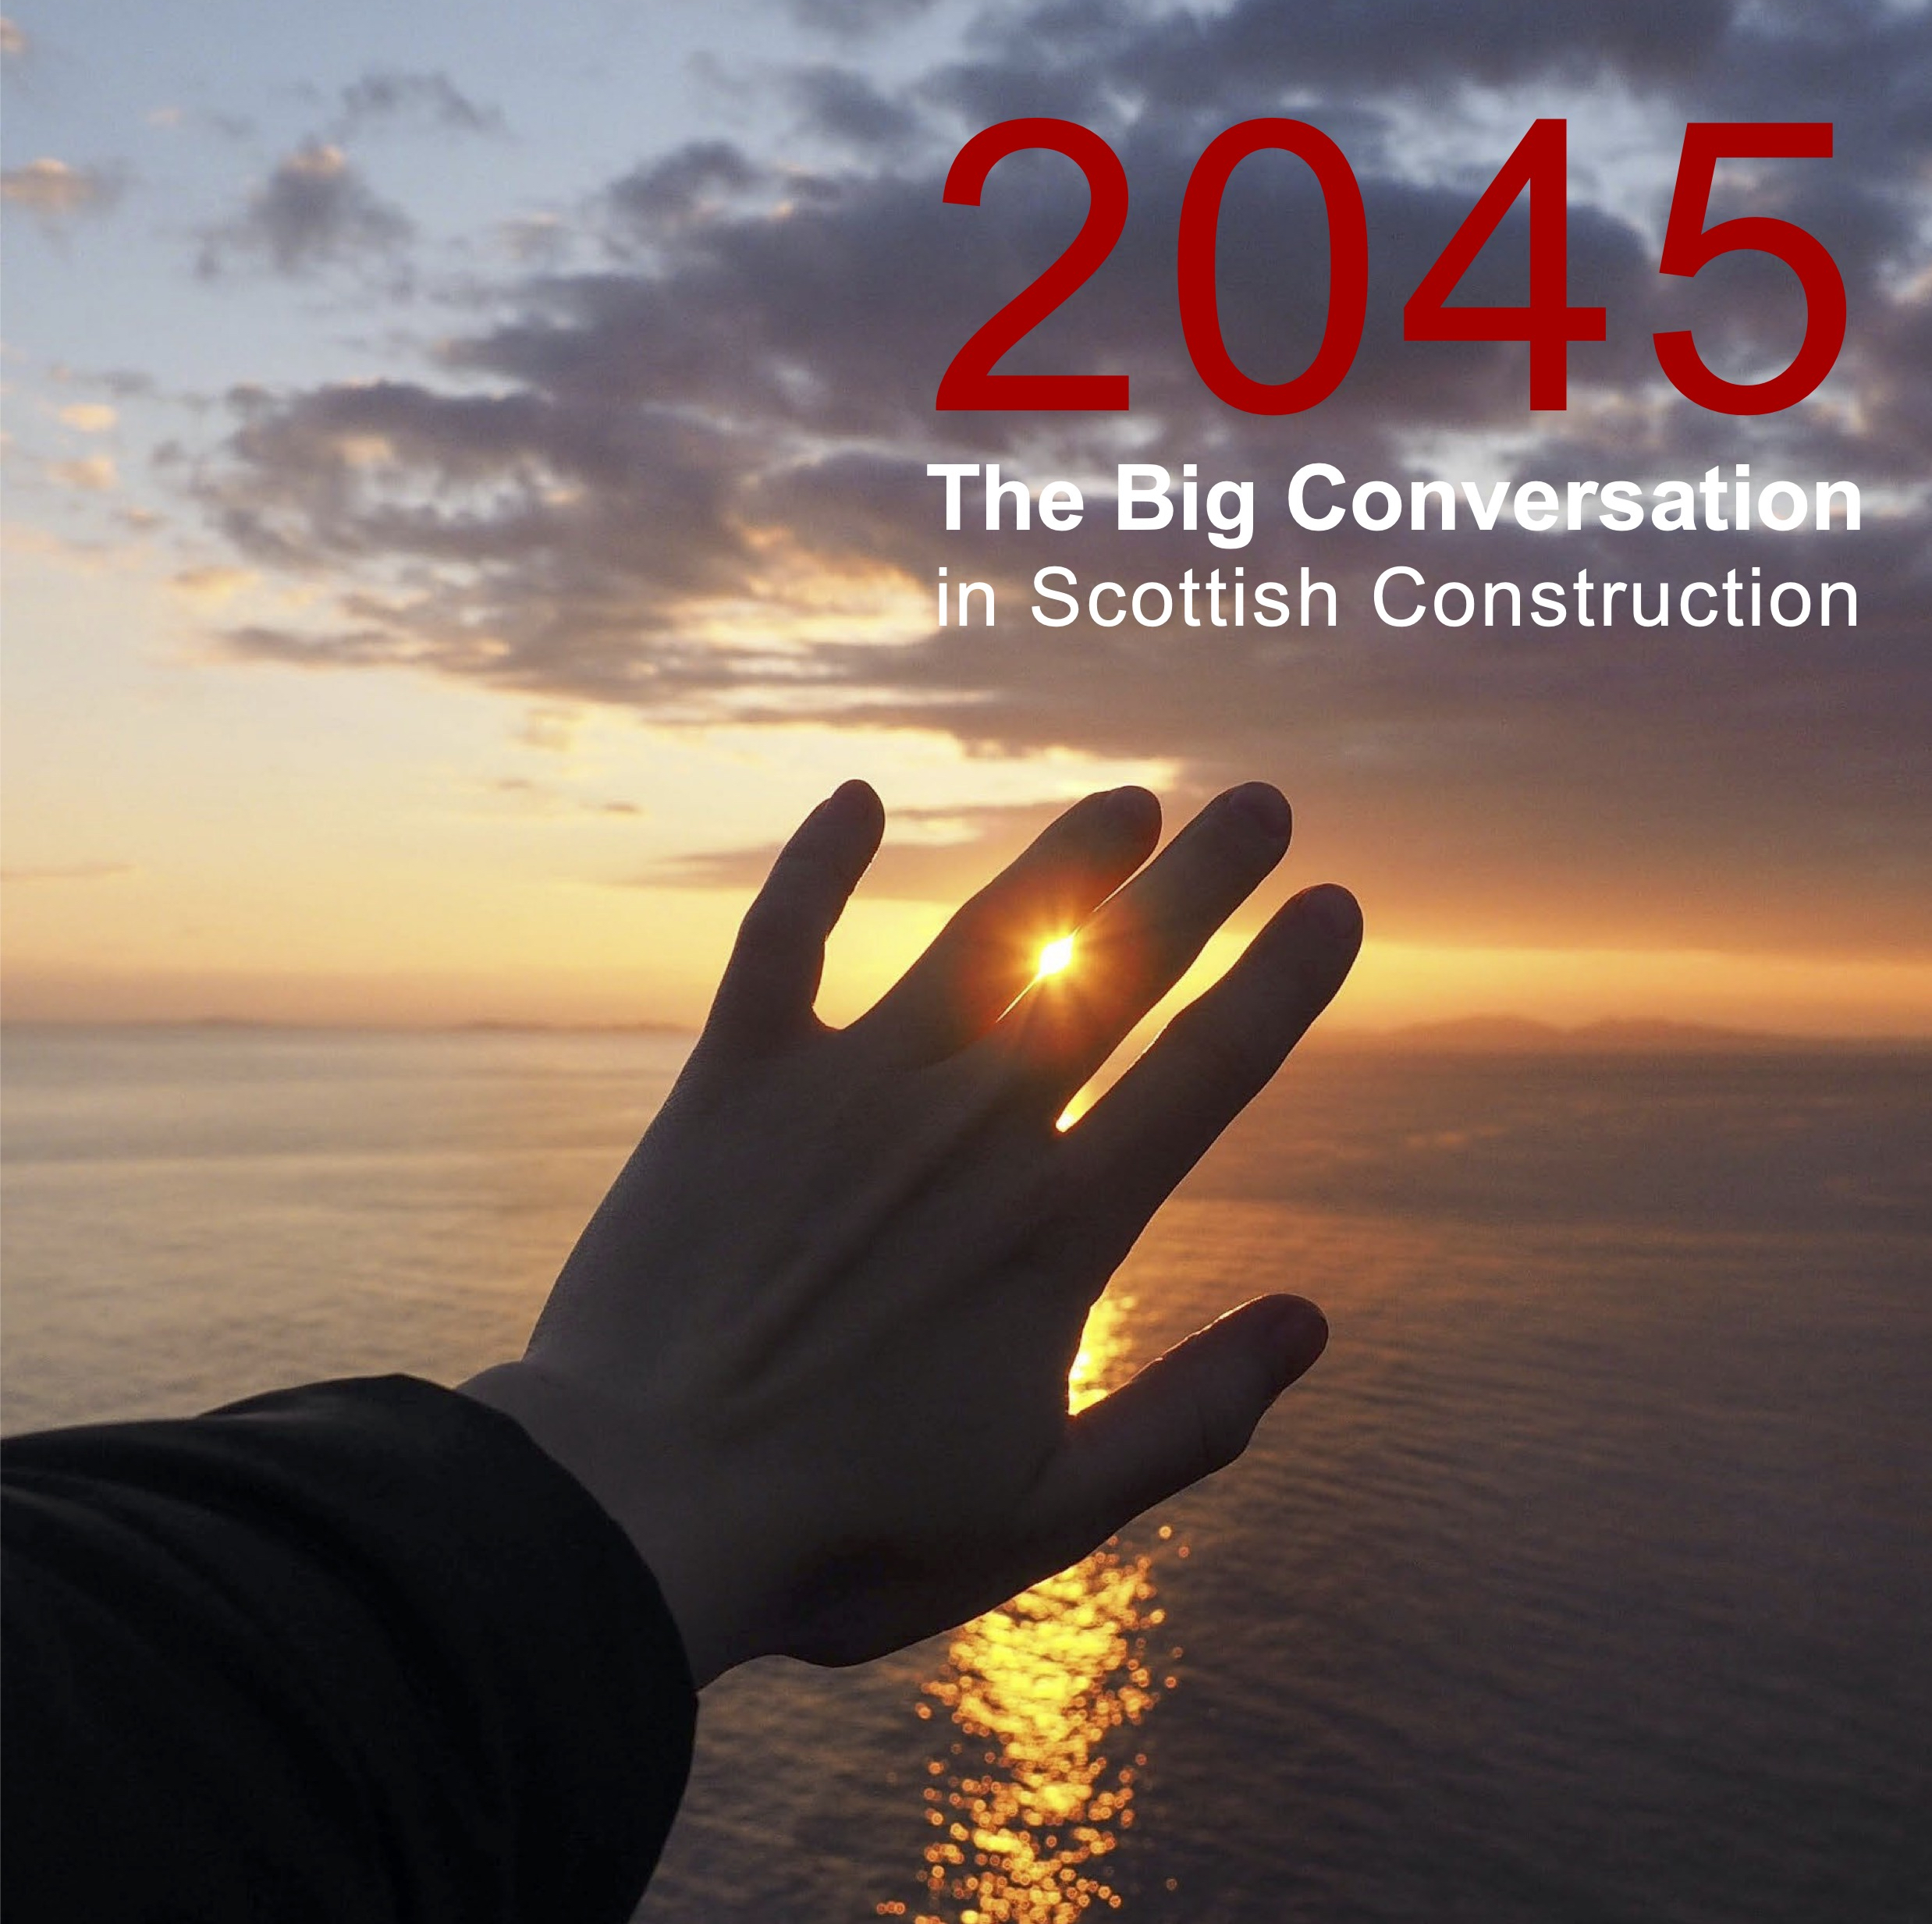 Big Conversation to consider how built environment and construction will deliver just transition to net zero